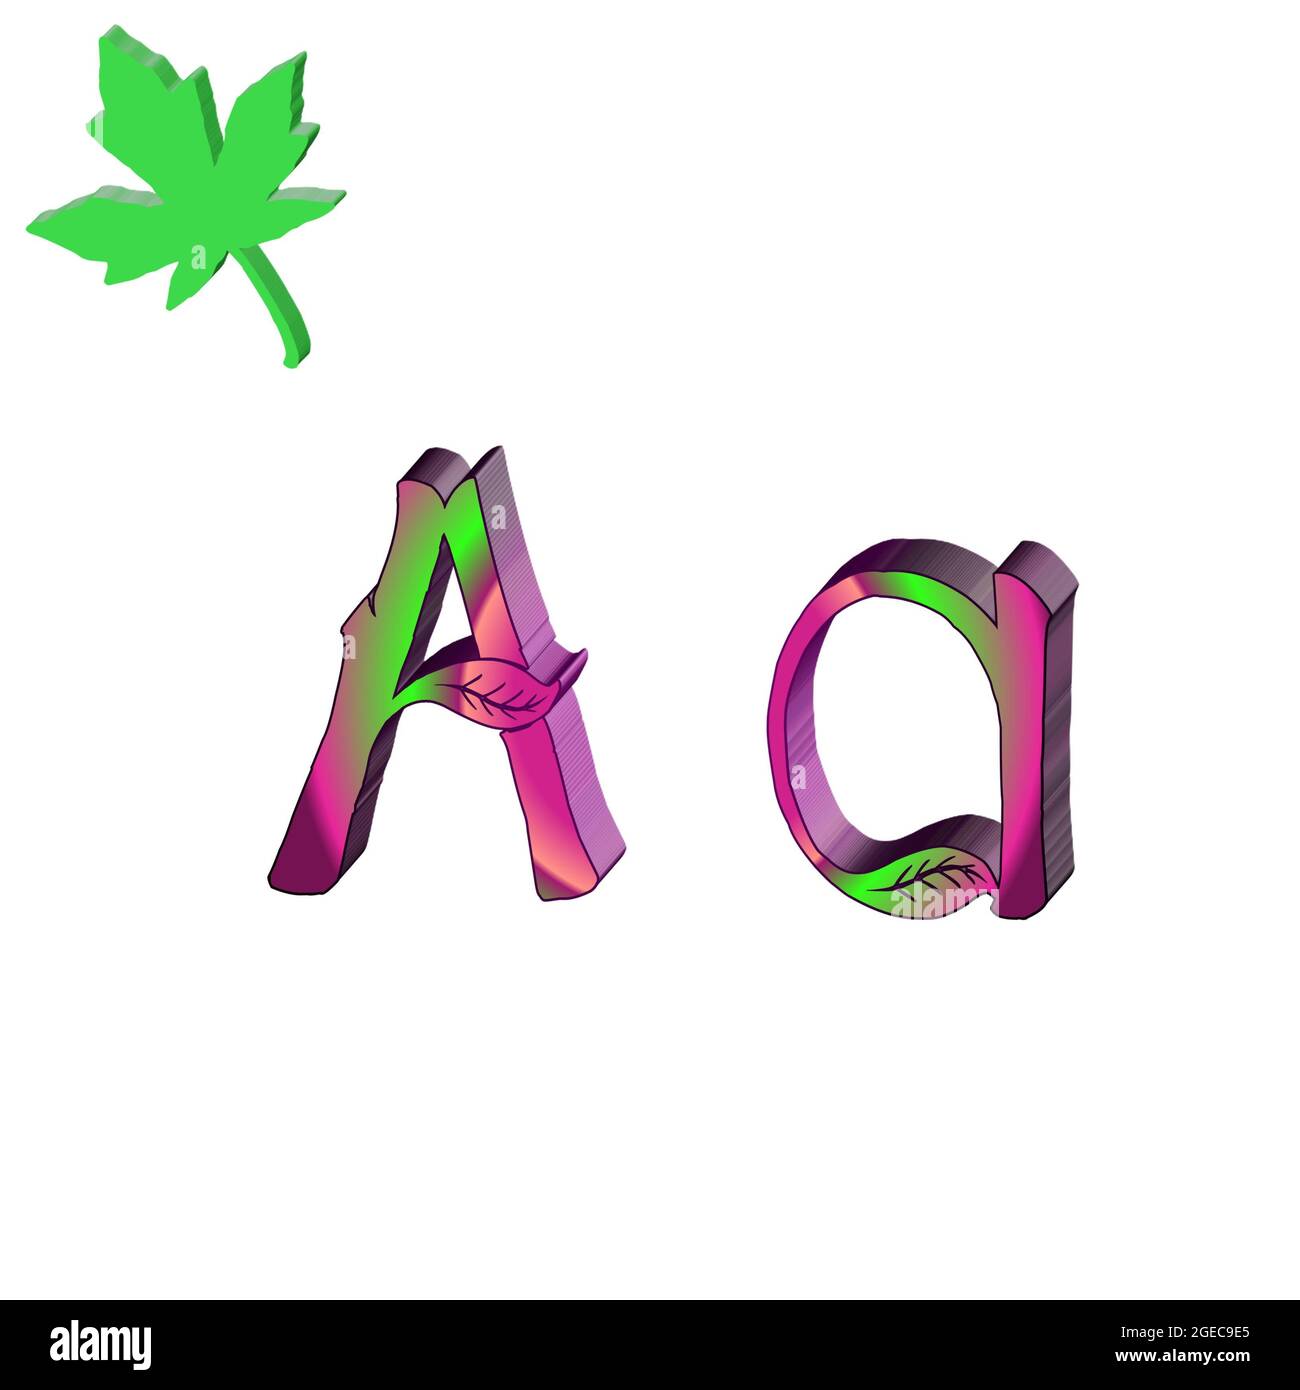 A To Z Capital Letter Cut Out Stock Images & Pictures - Alamy